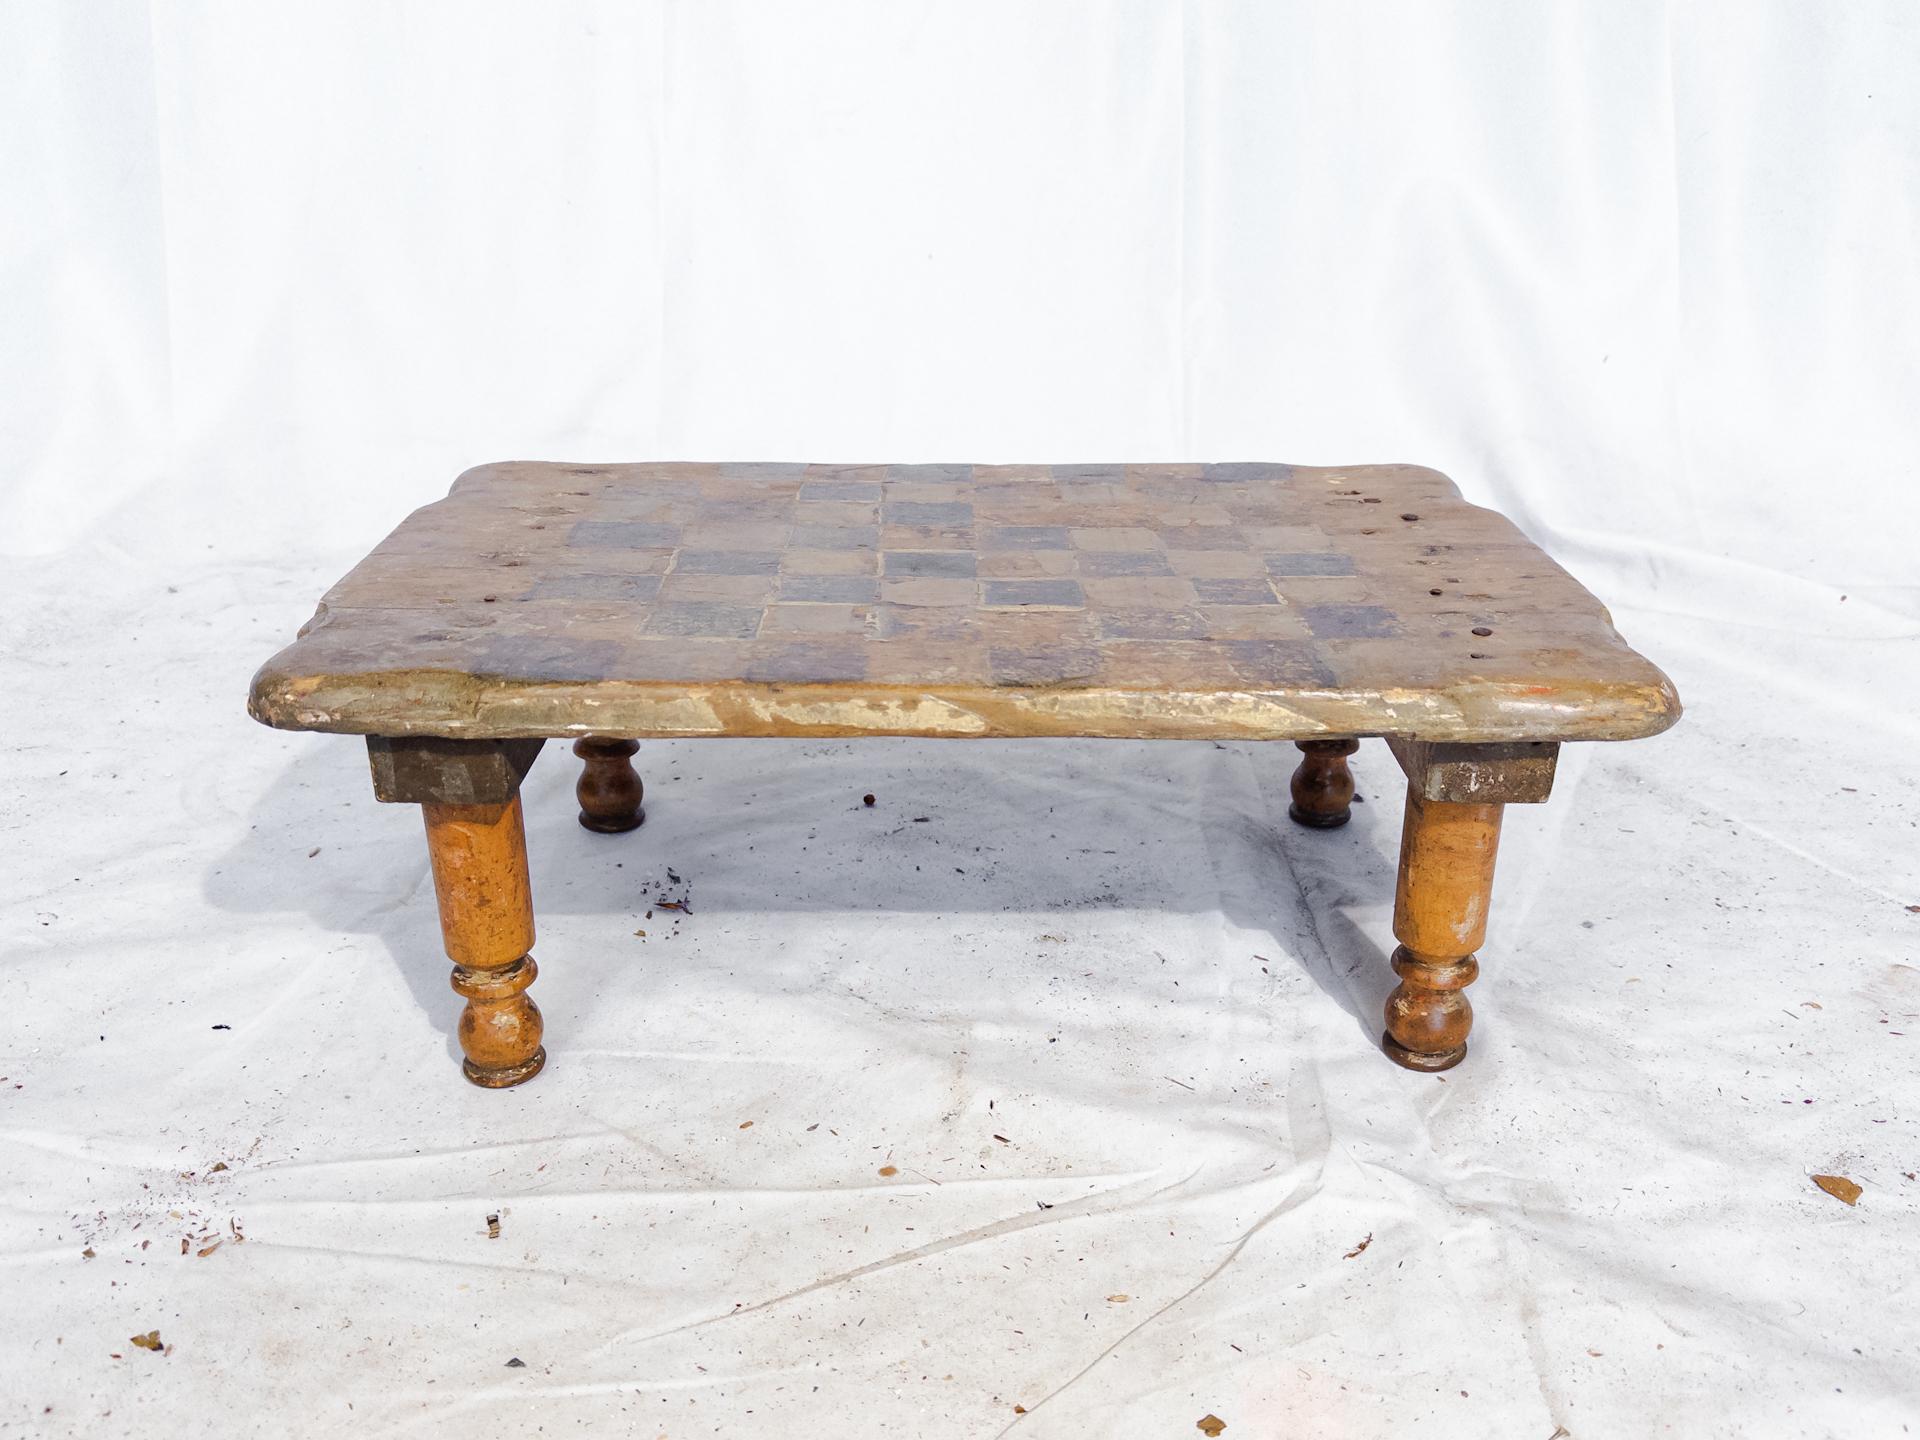 Wood Antique Small Checkerboard Table / Chess Board For Sale